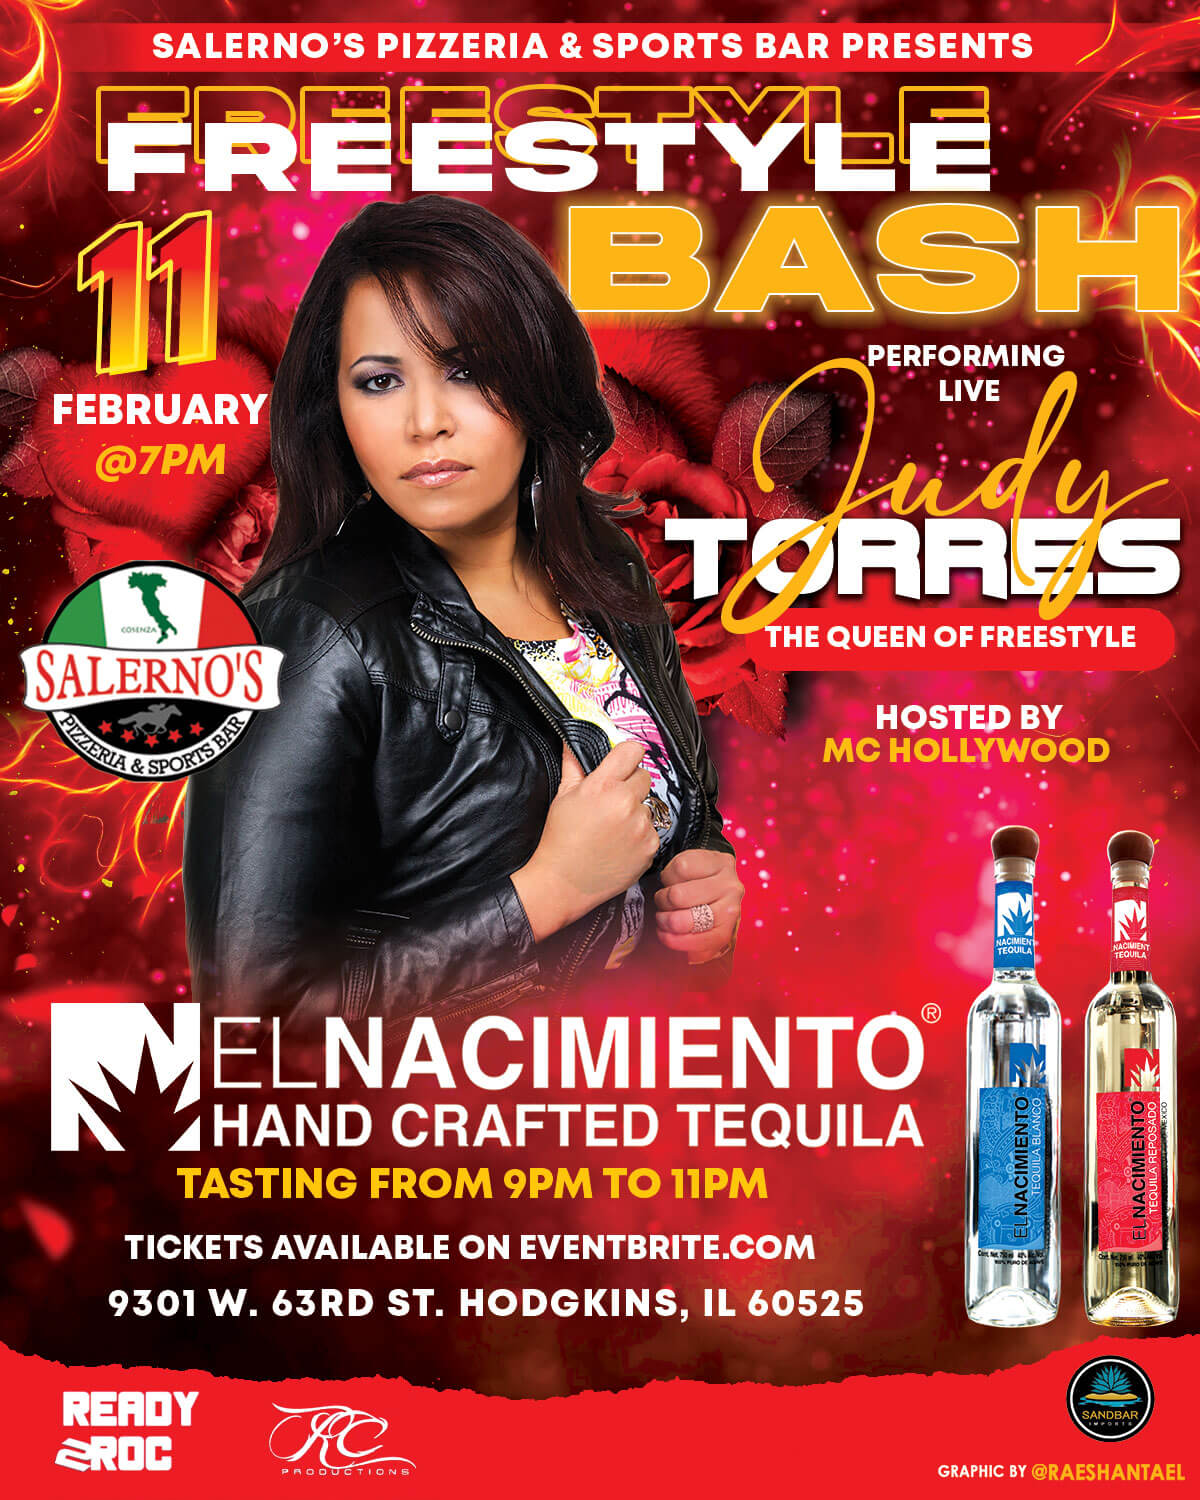 Judy Torres Live in Concert and Live Tasting at Salerno's